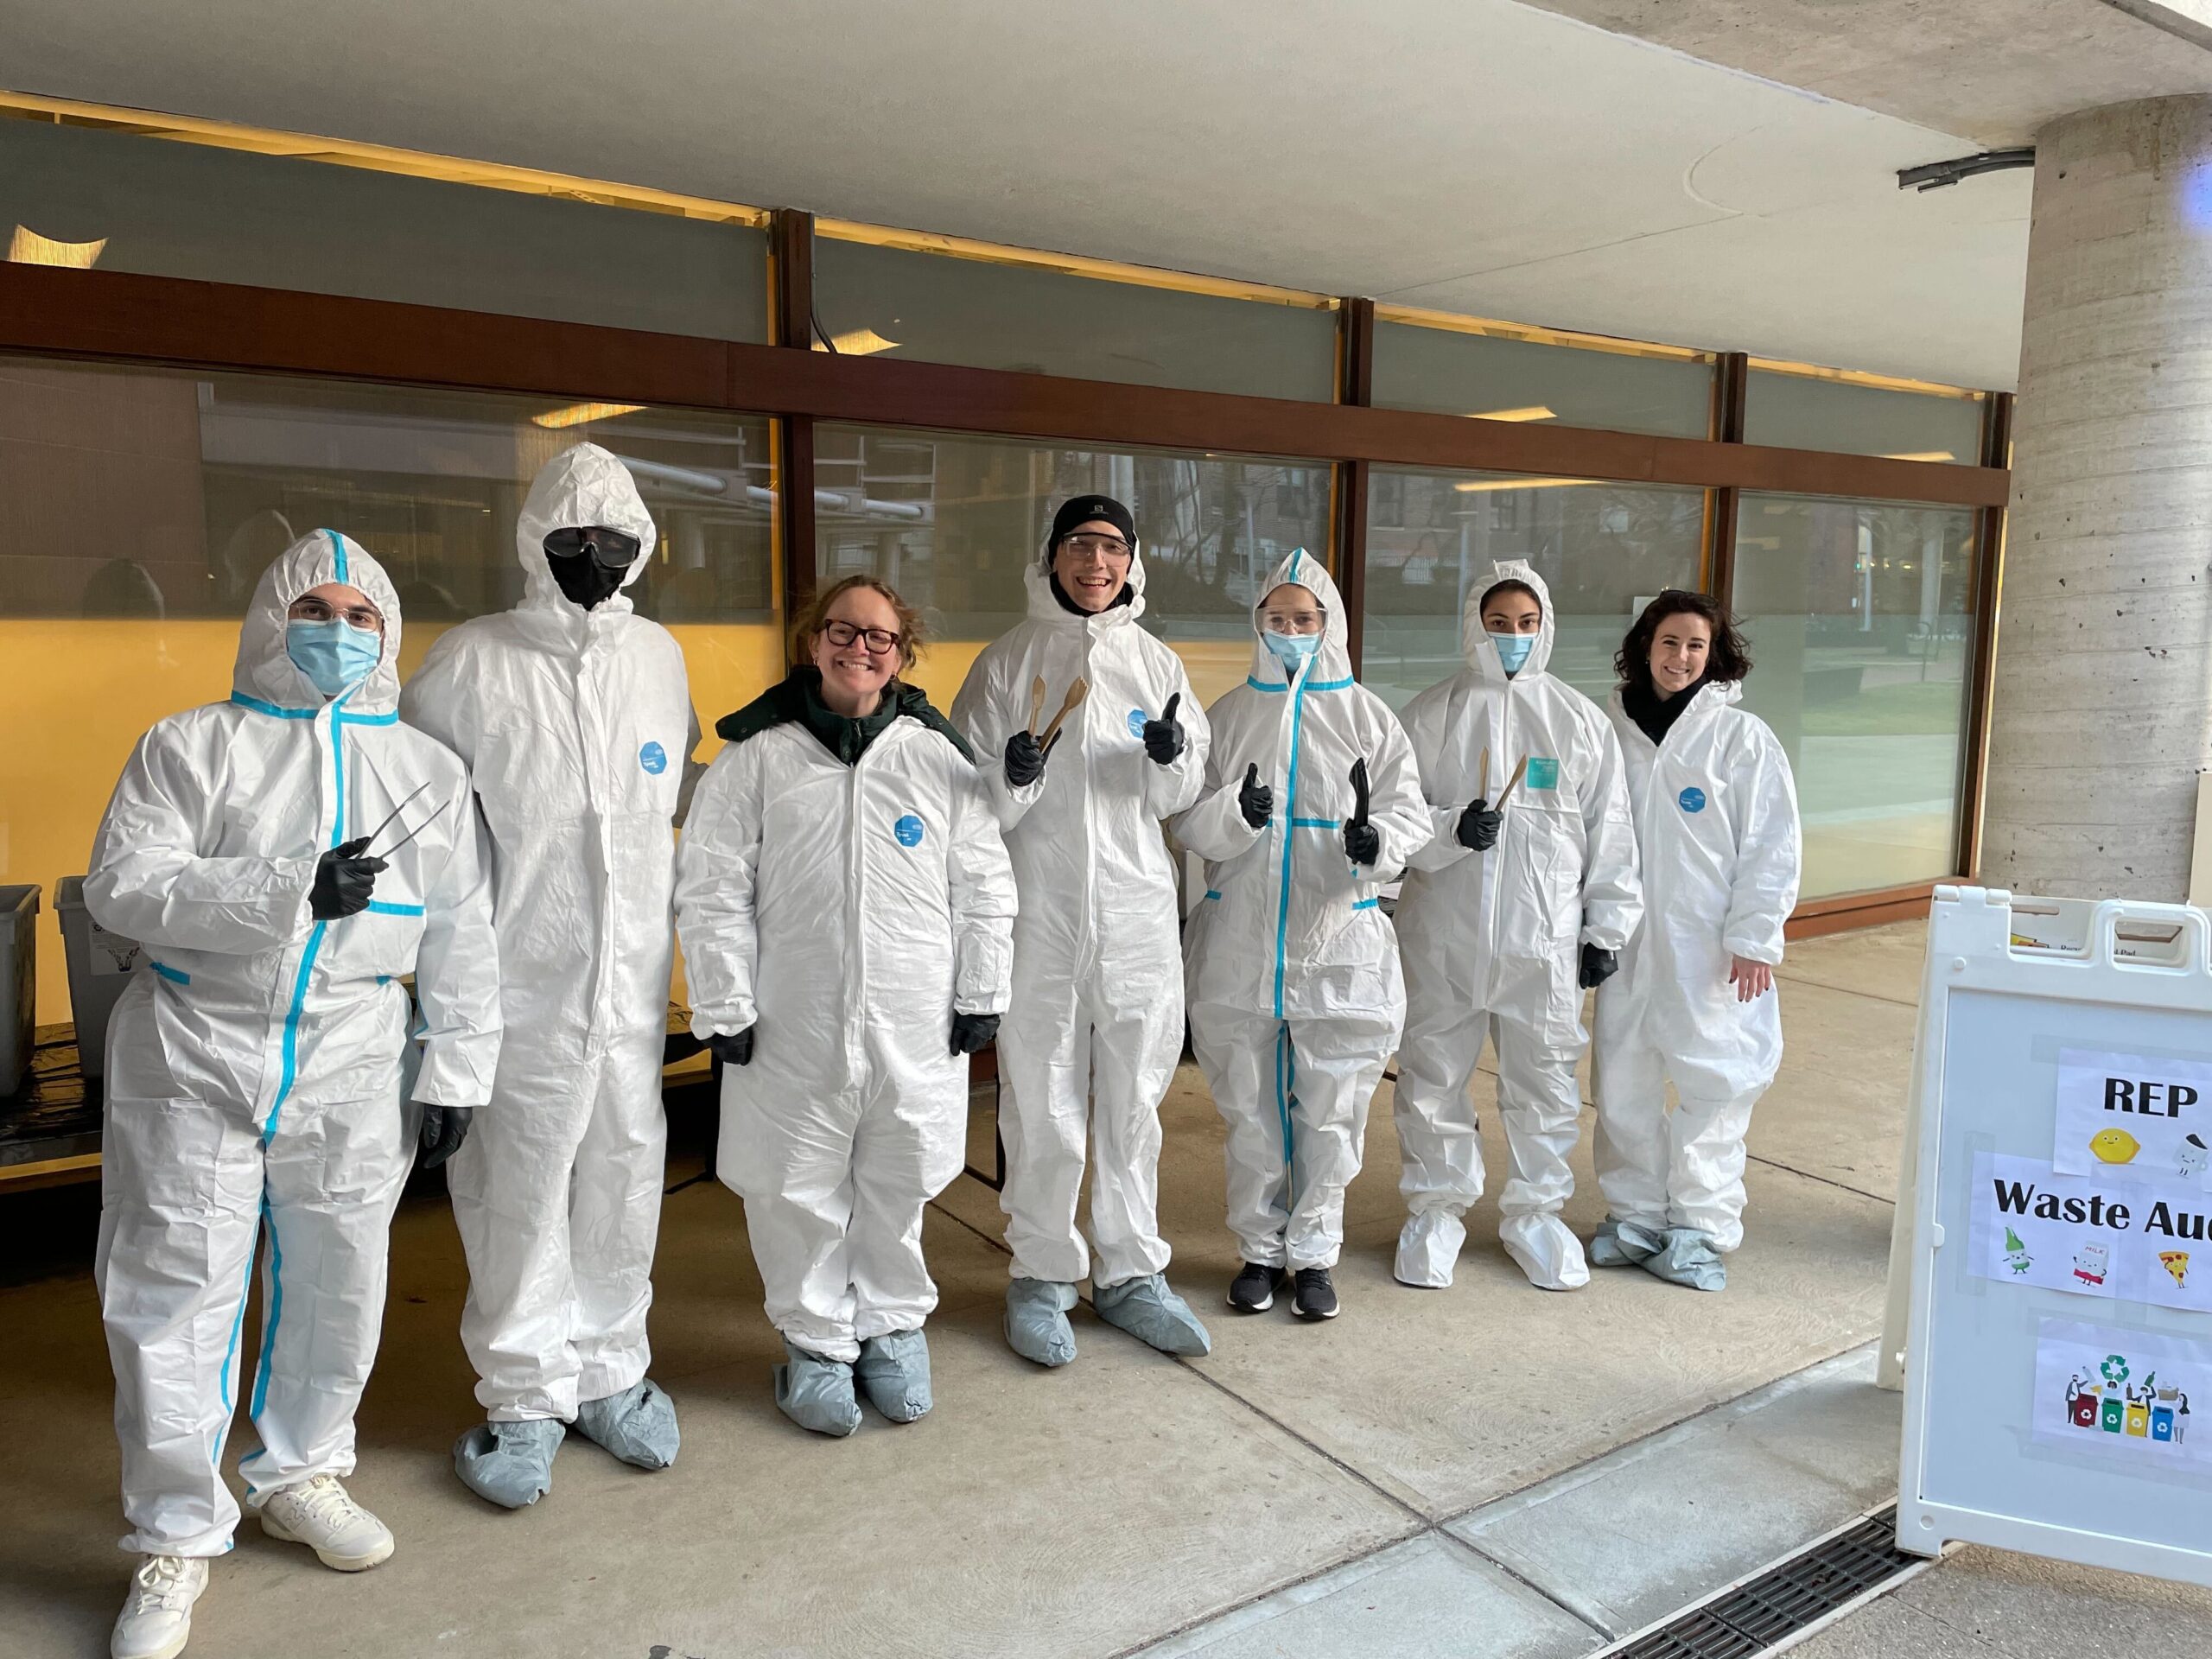 REP members pose in safety suits during a 2023 Waste Audit.